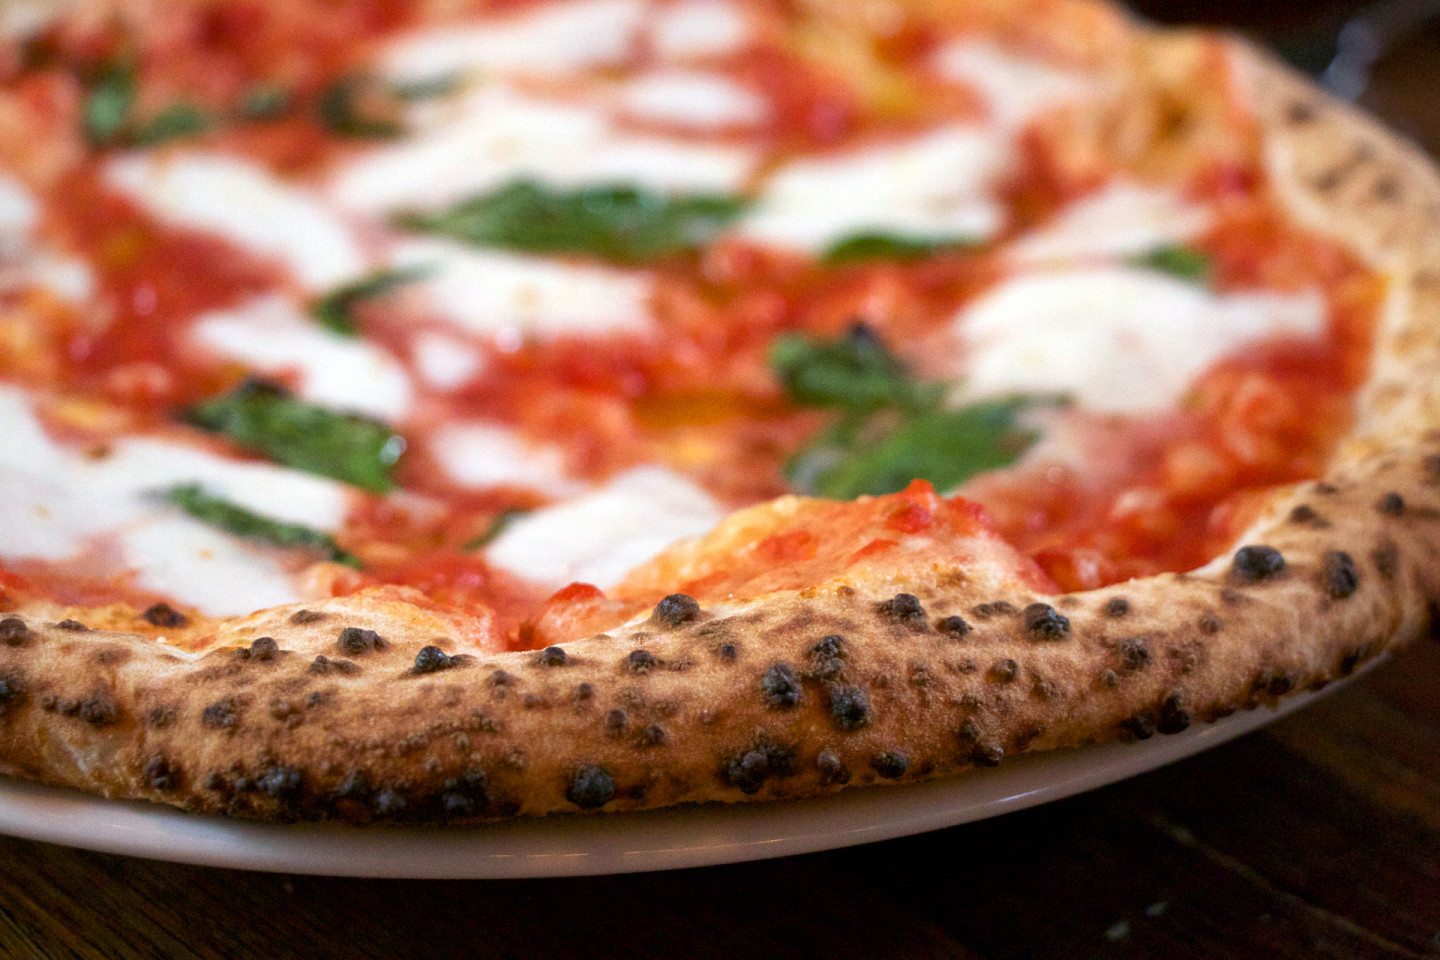 Bay Area Bites Guide to the Best Italian-Style Pizzas in Berkeley and Oakla...